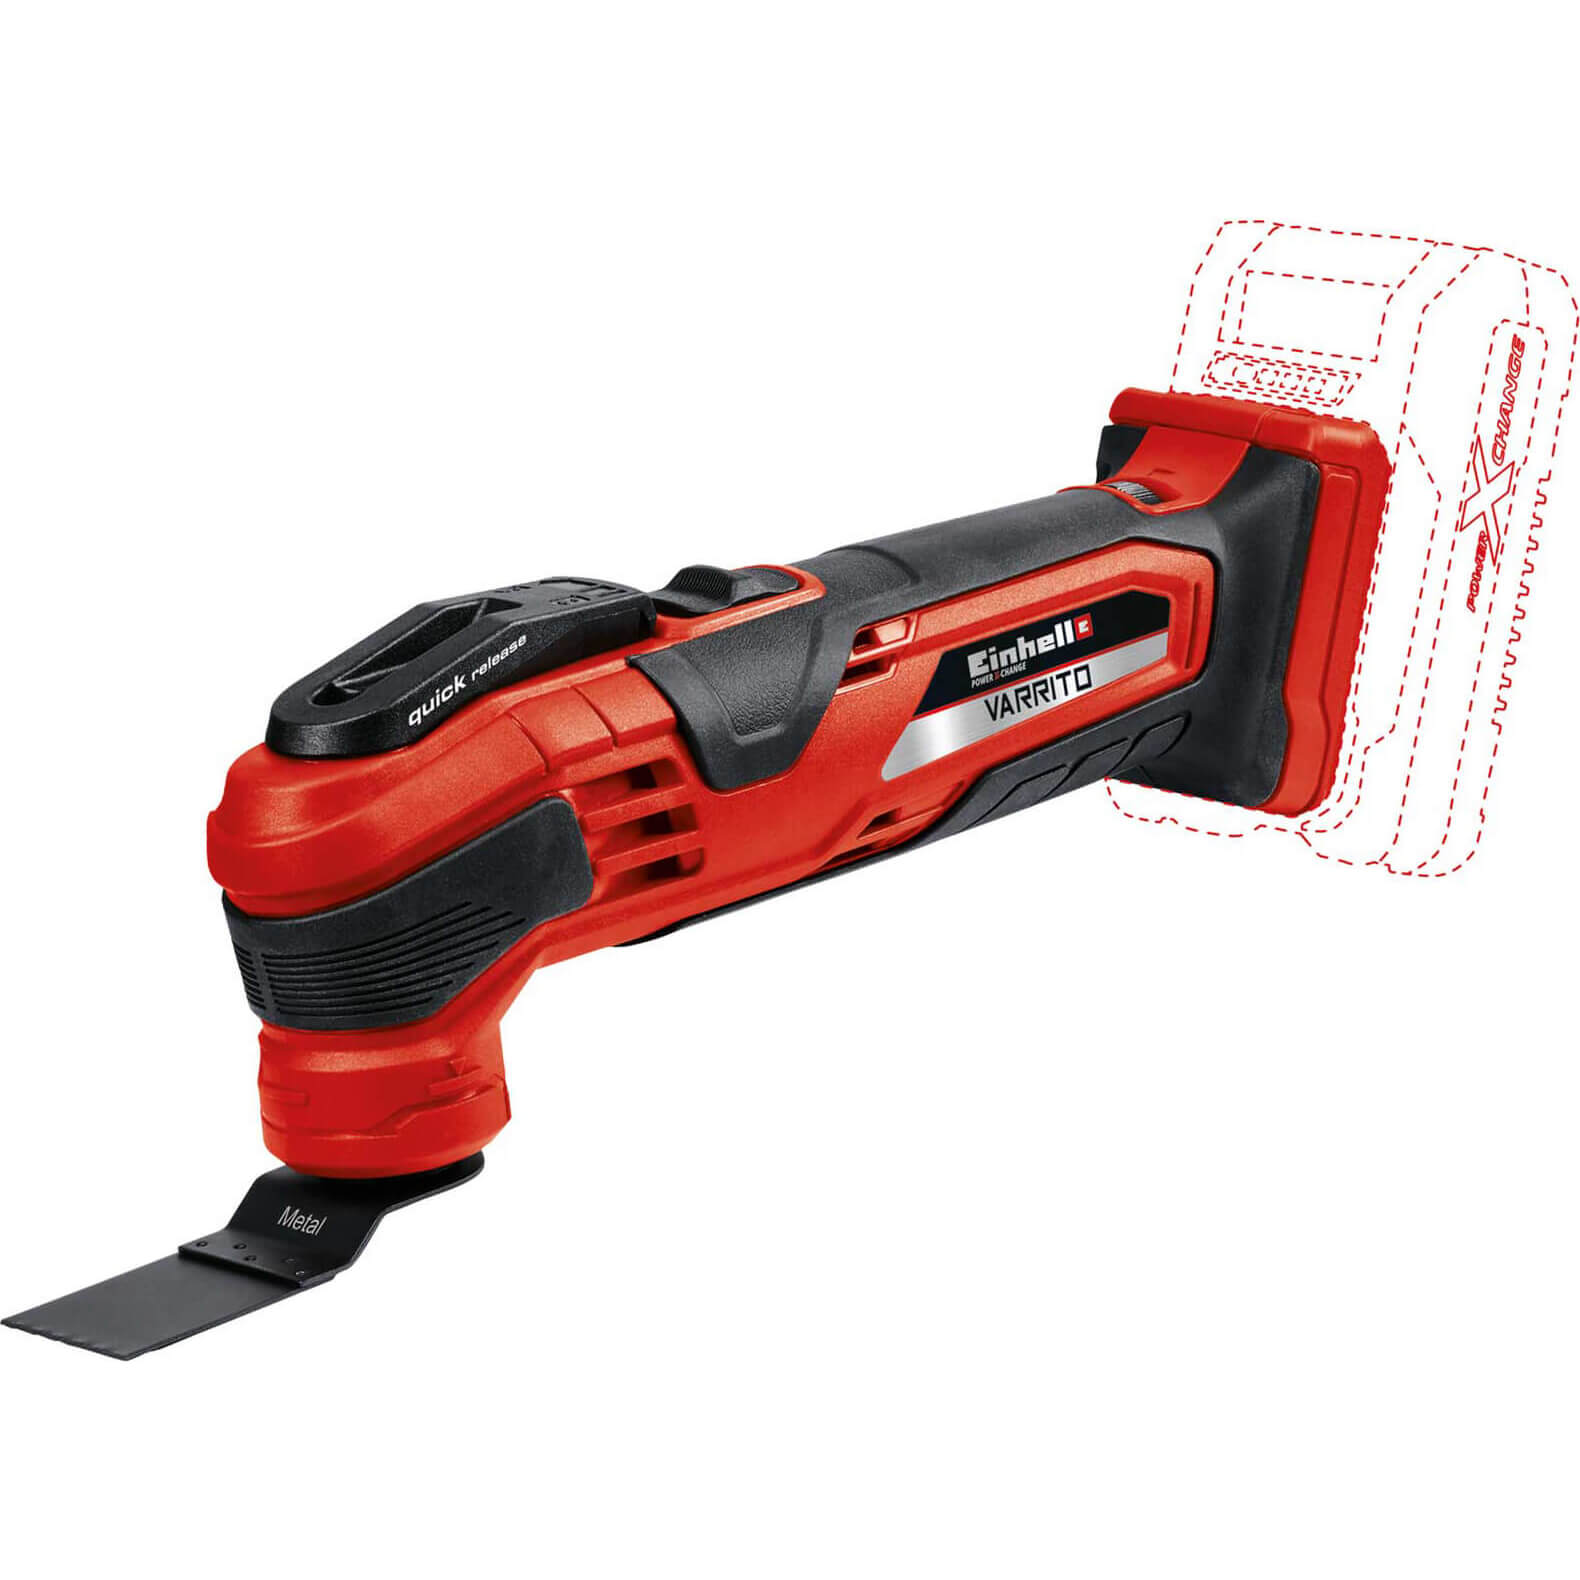 Image of Einhell VARRITO 18v Cordless Oscillating Multi Tool No Batteries No Charger No Case